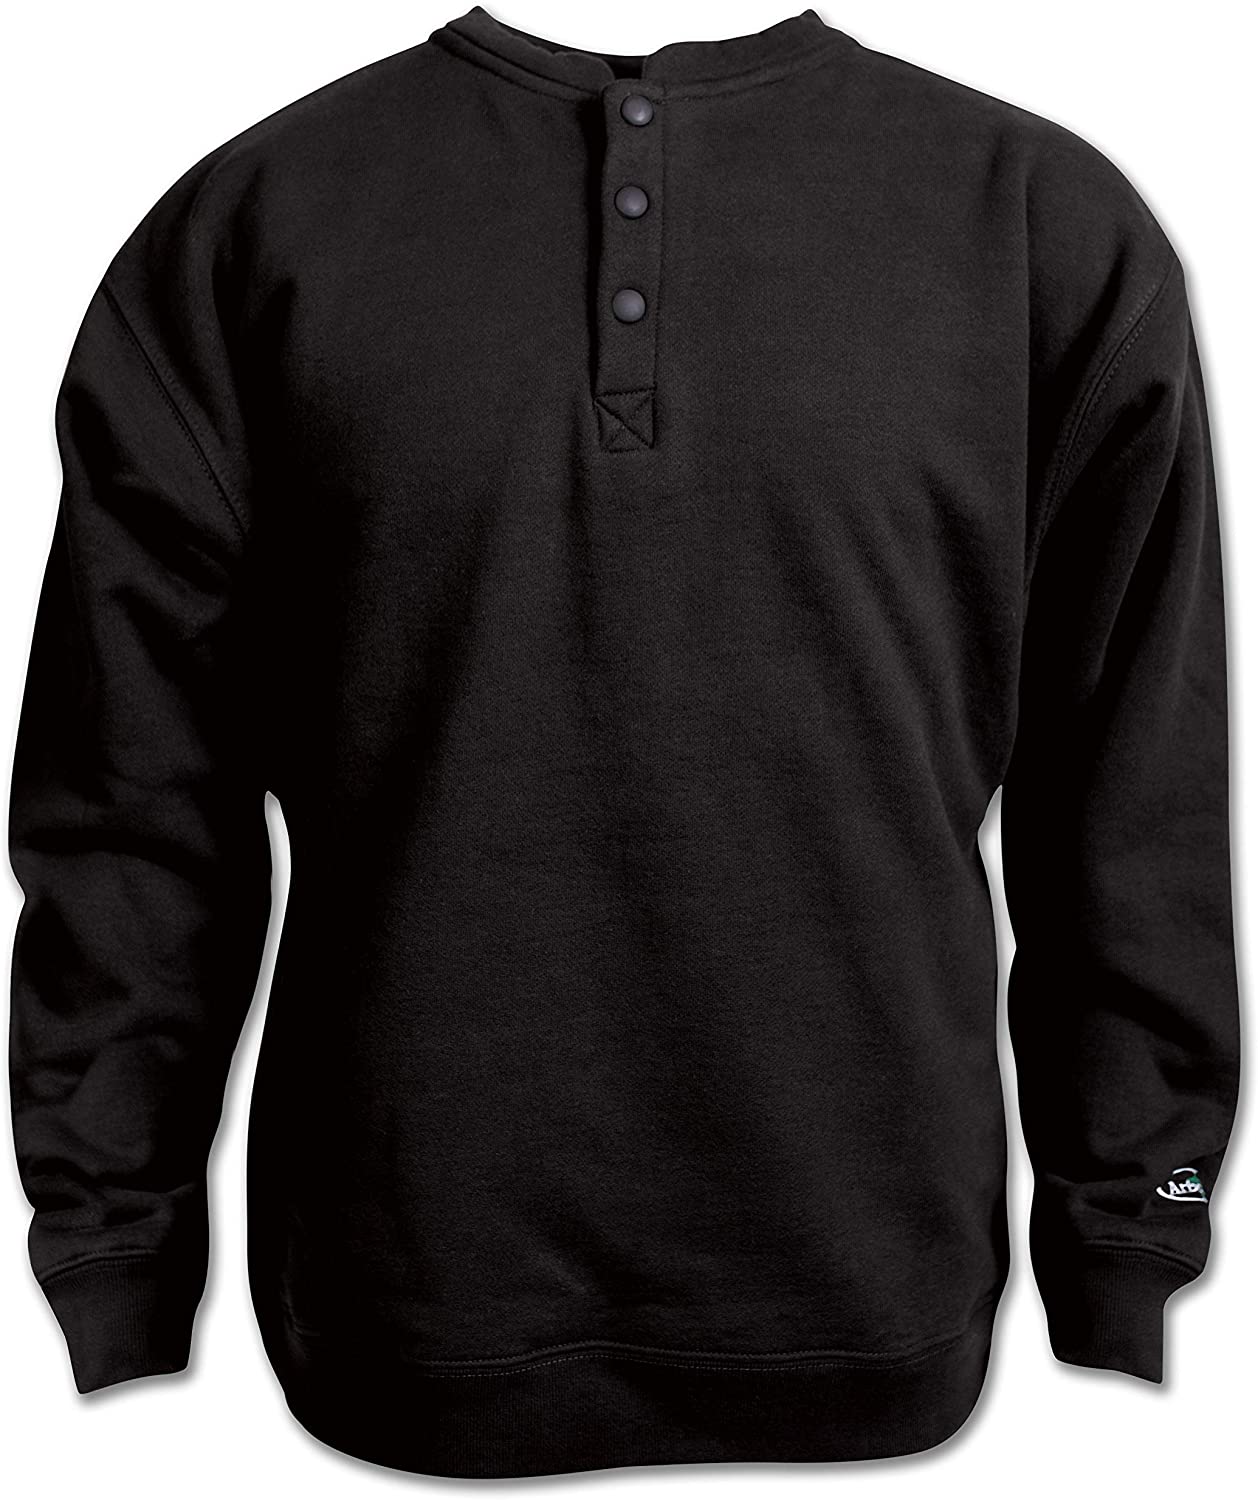 Arborwear Men's Single Thick Crew Sweatshirt in Black from the from